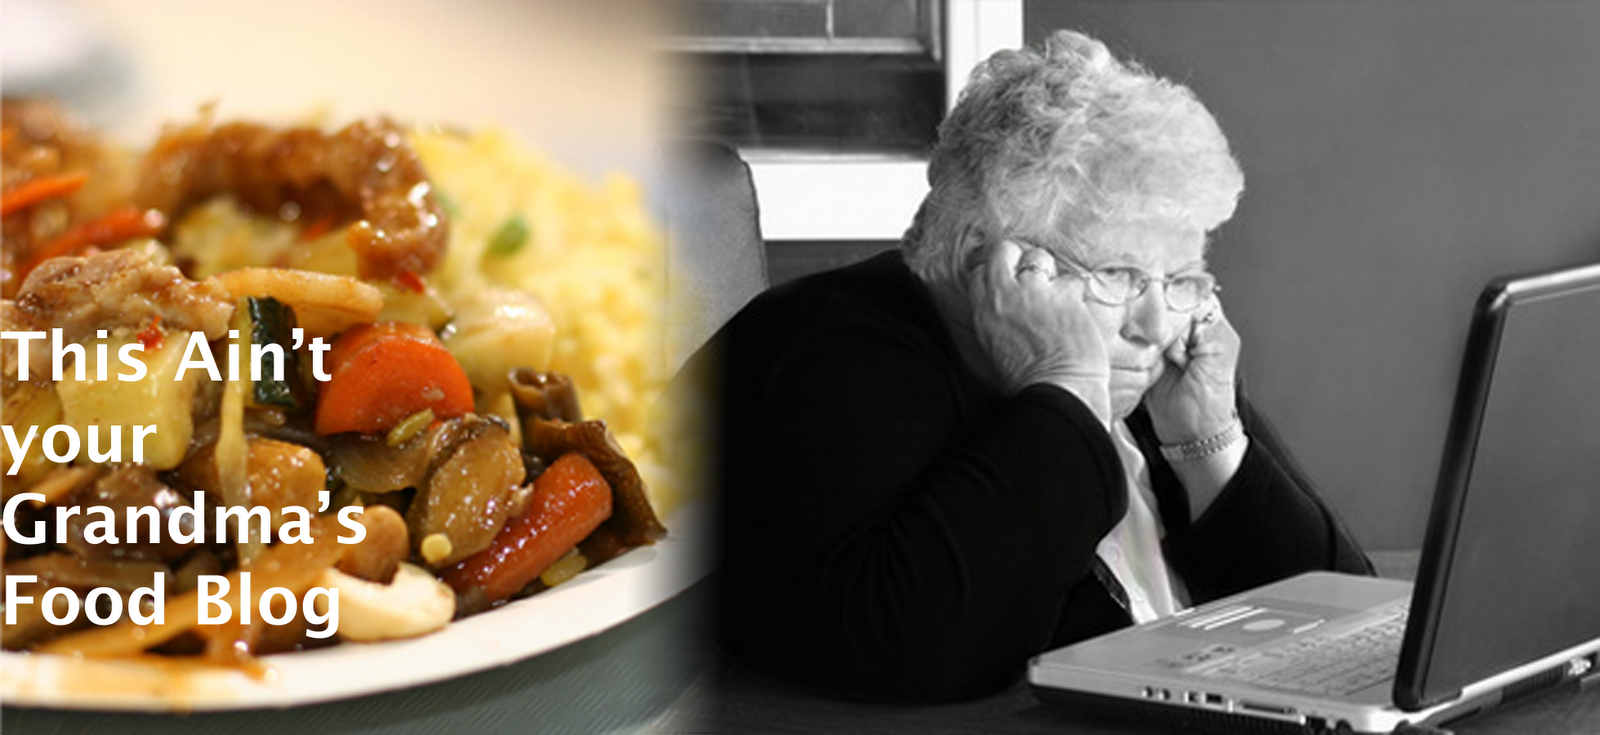 This Ain't Your Grandma's Food Blog